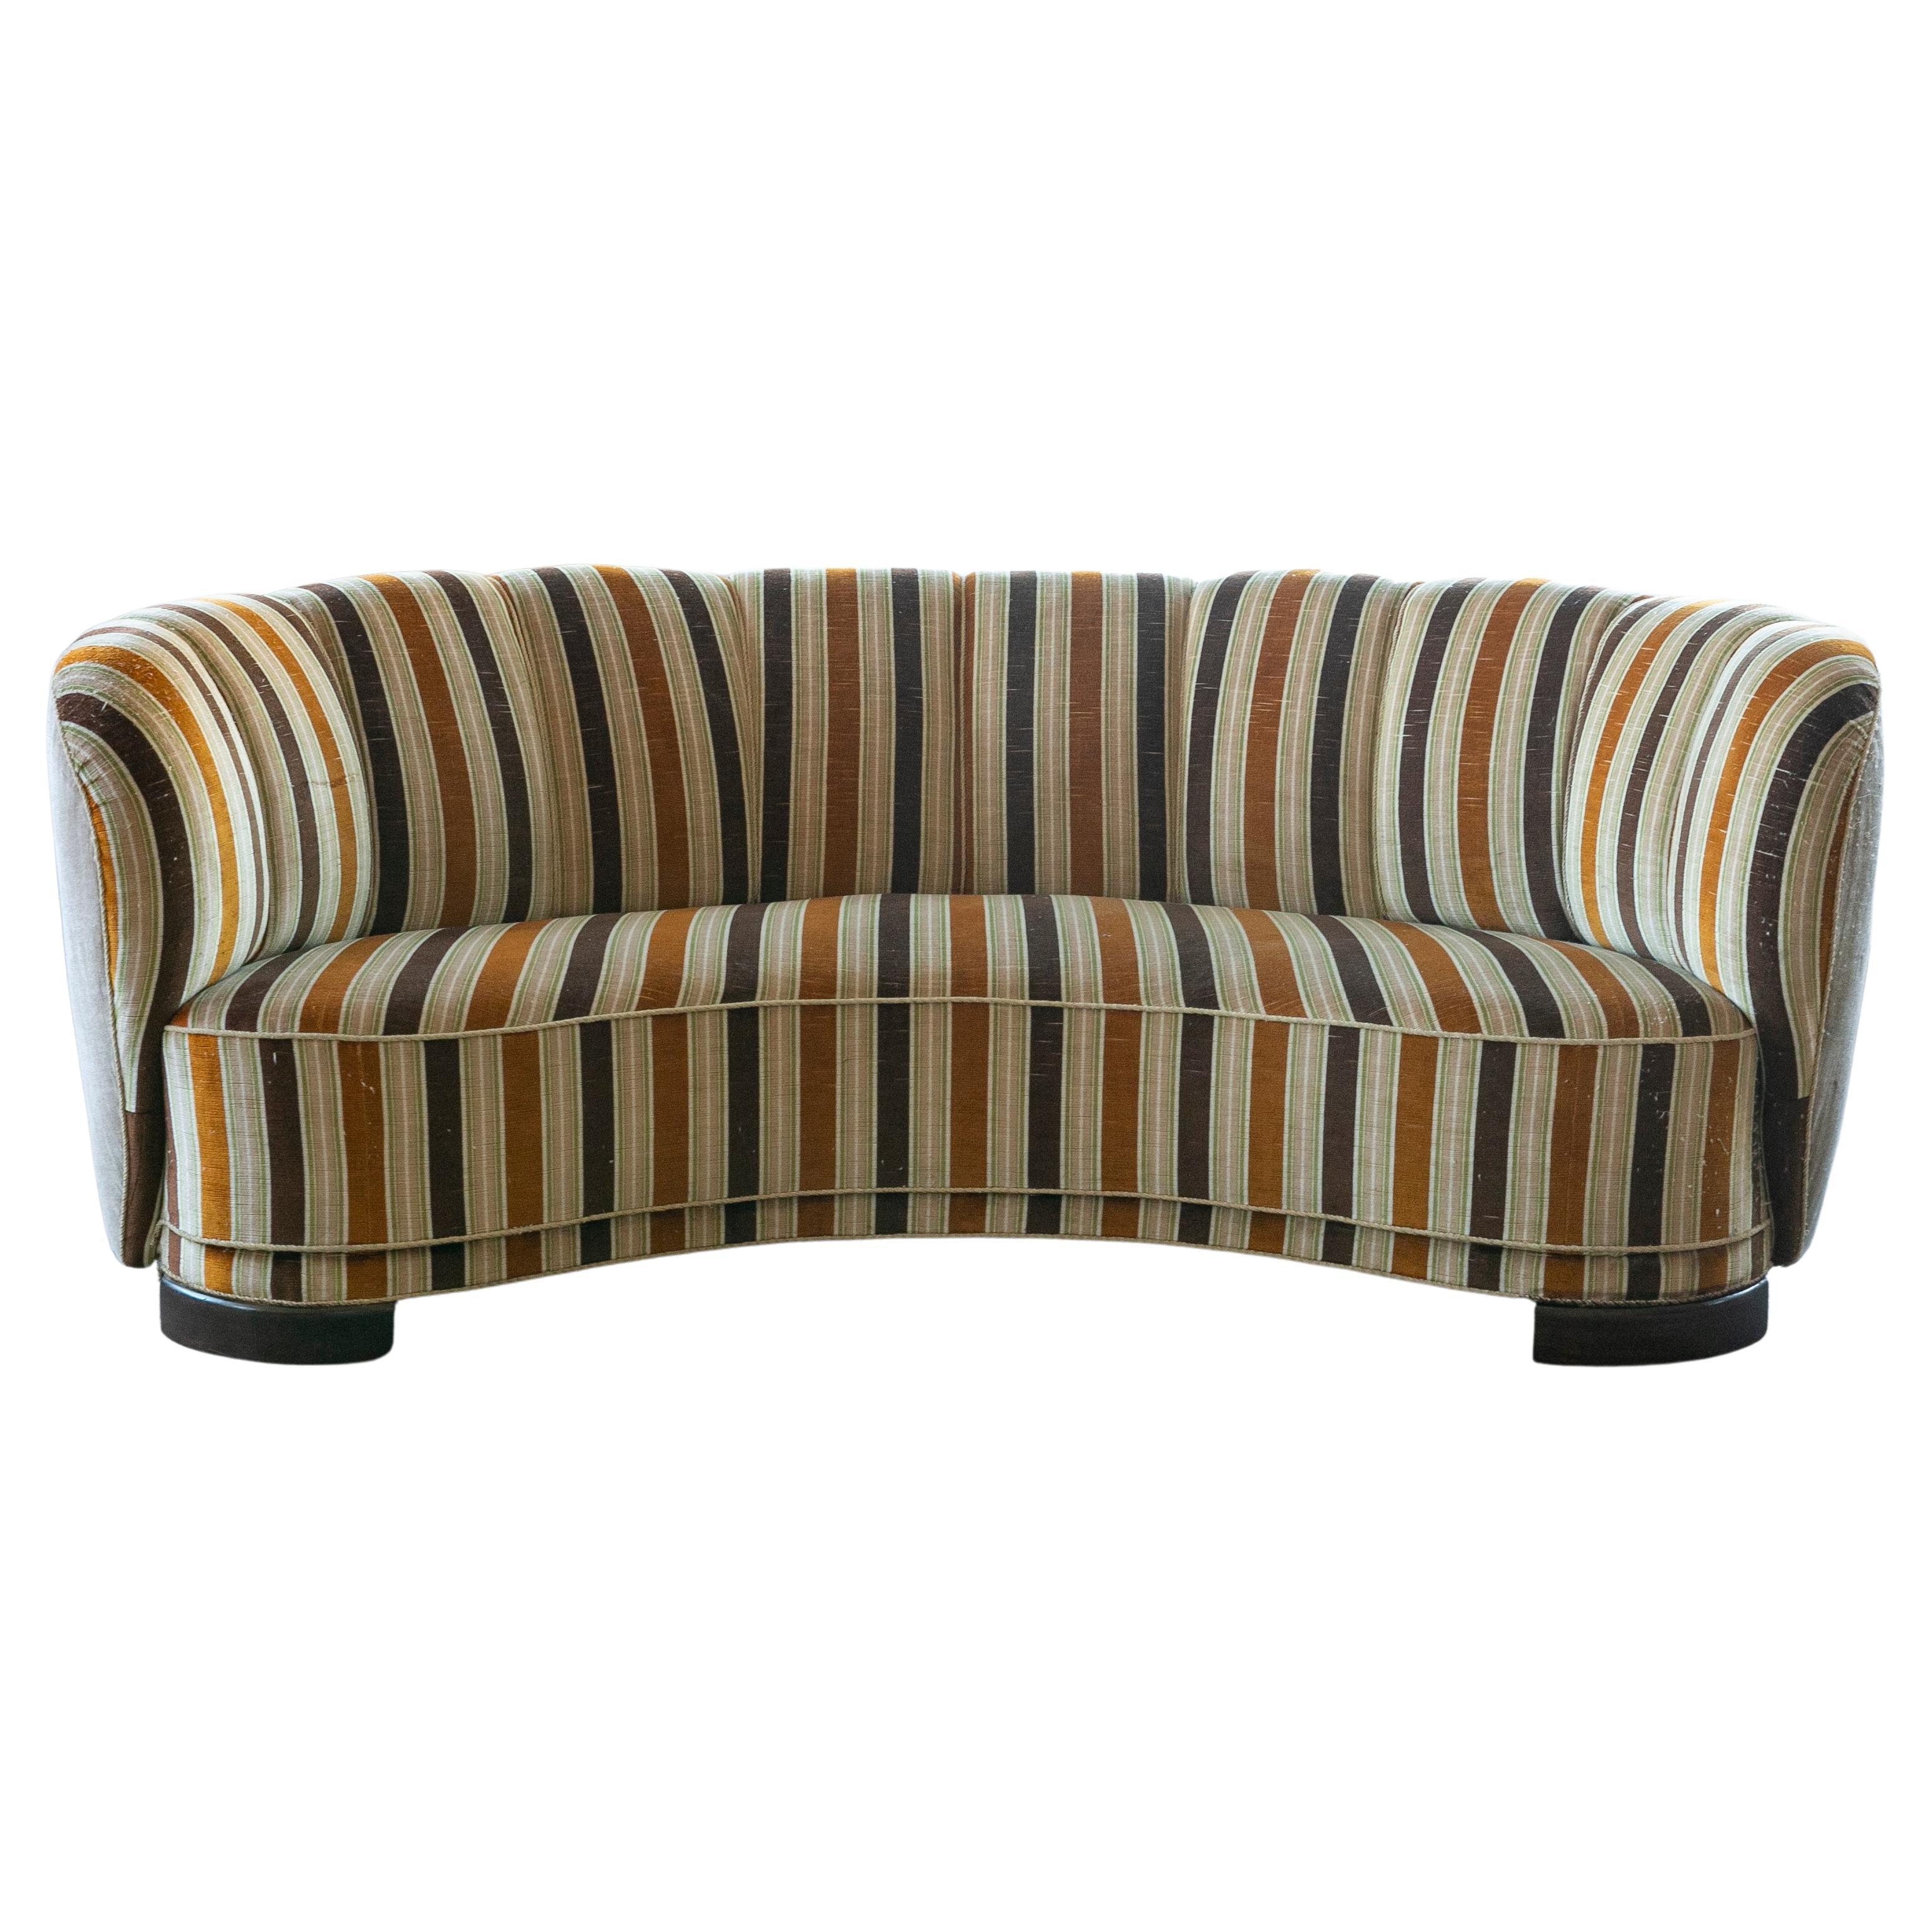 Danish 1940's Large Banana Form Curved Sofa in Striped Fabric